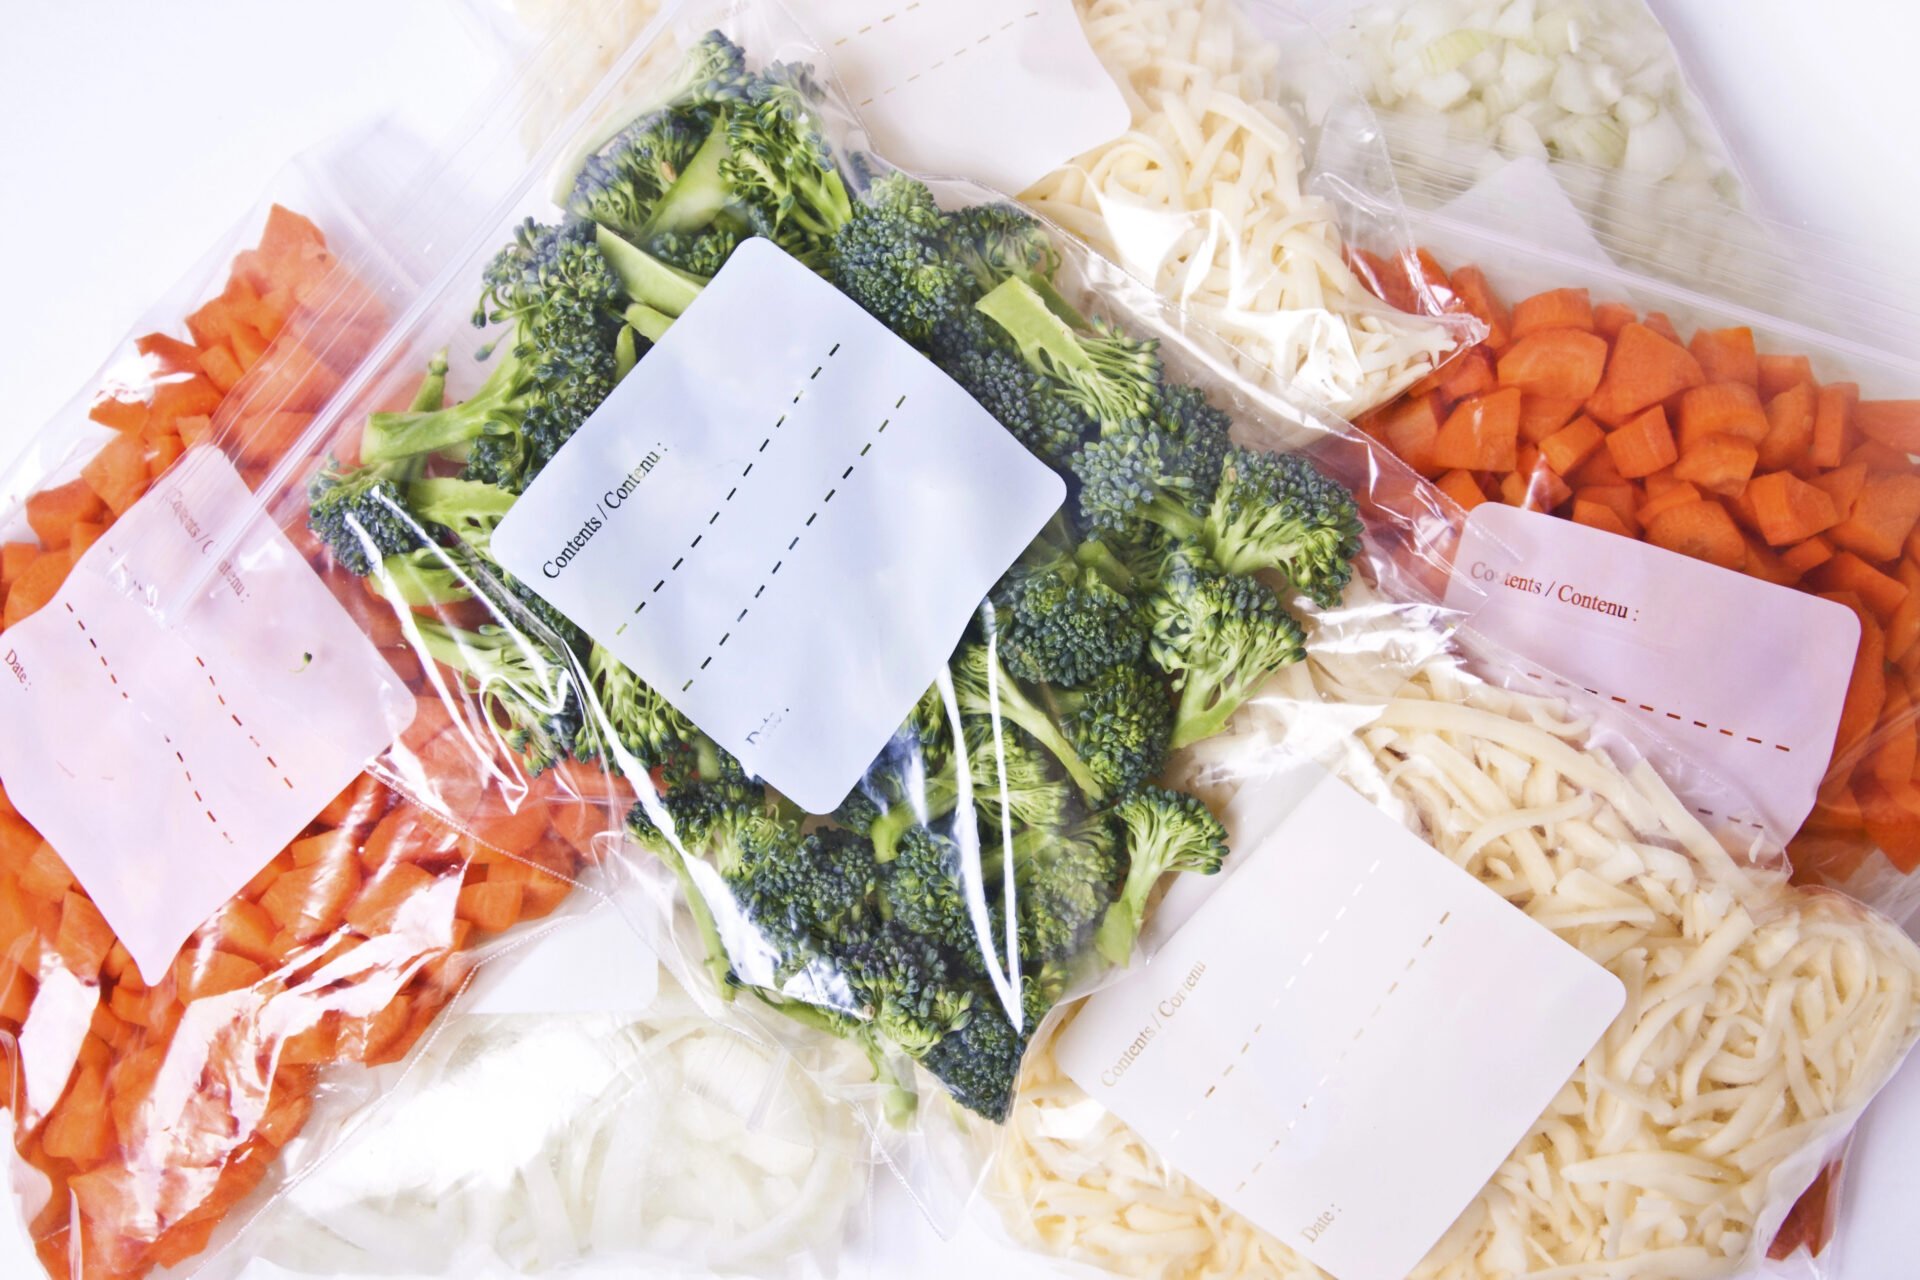 Plastic sandwich bags with broccoli and cauliflower and carrots